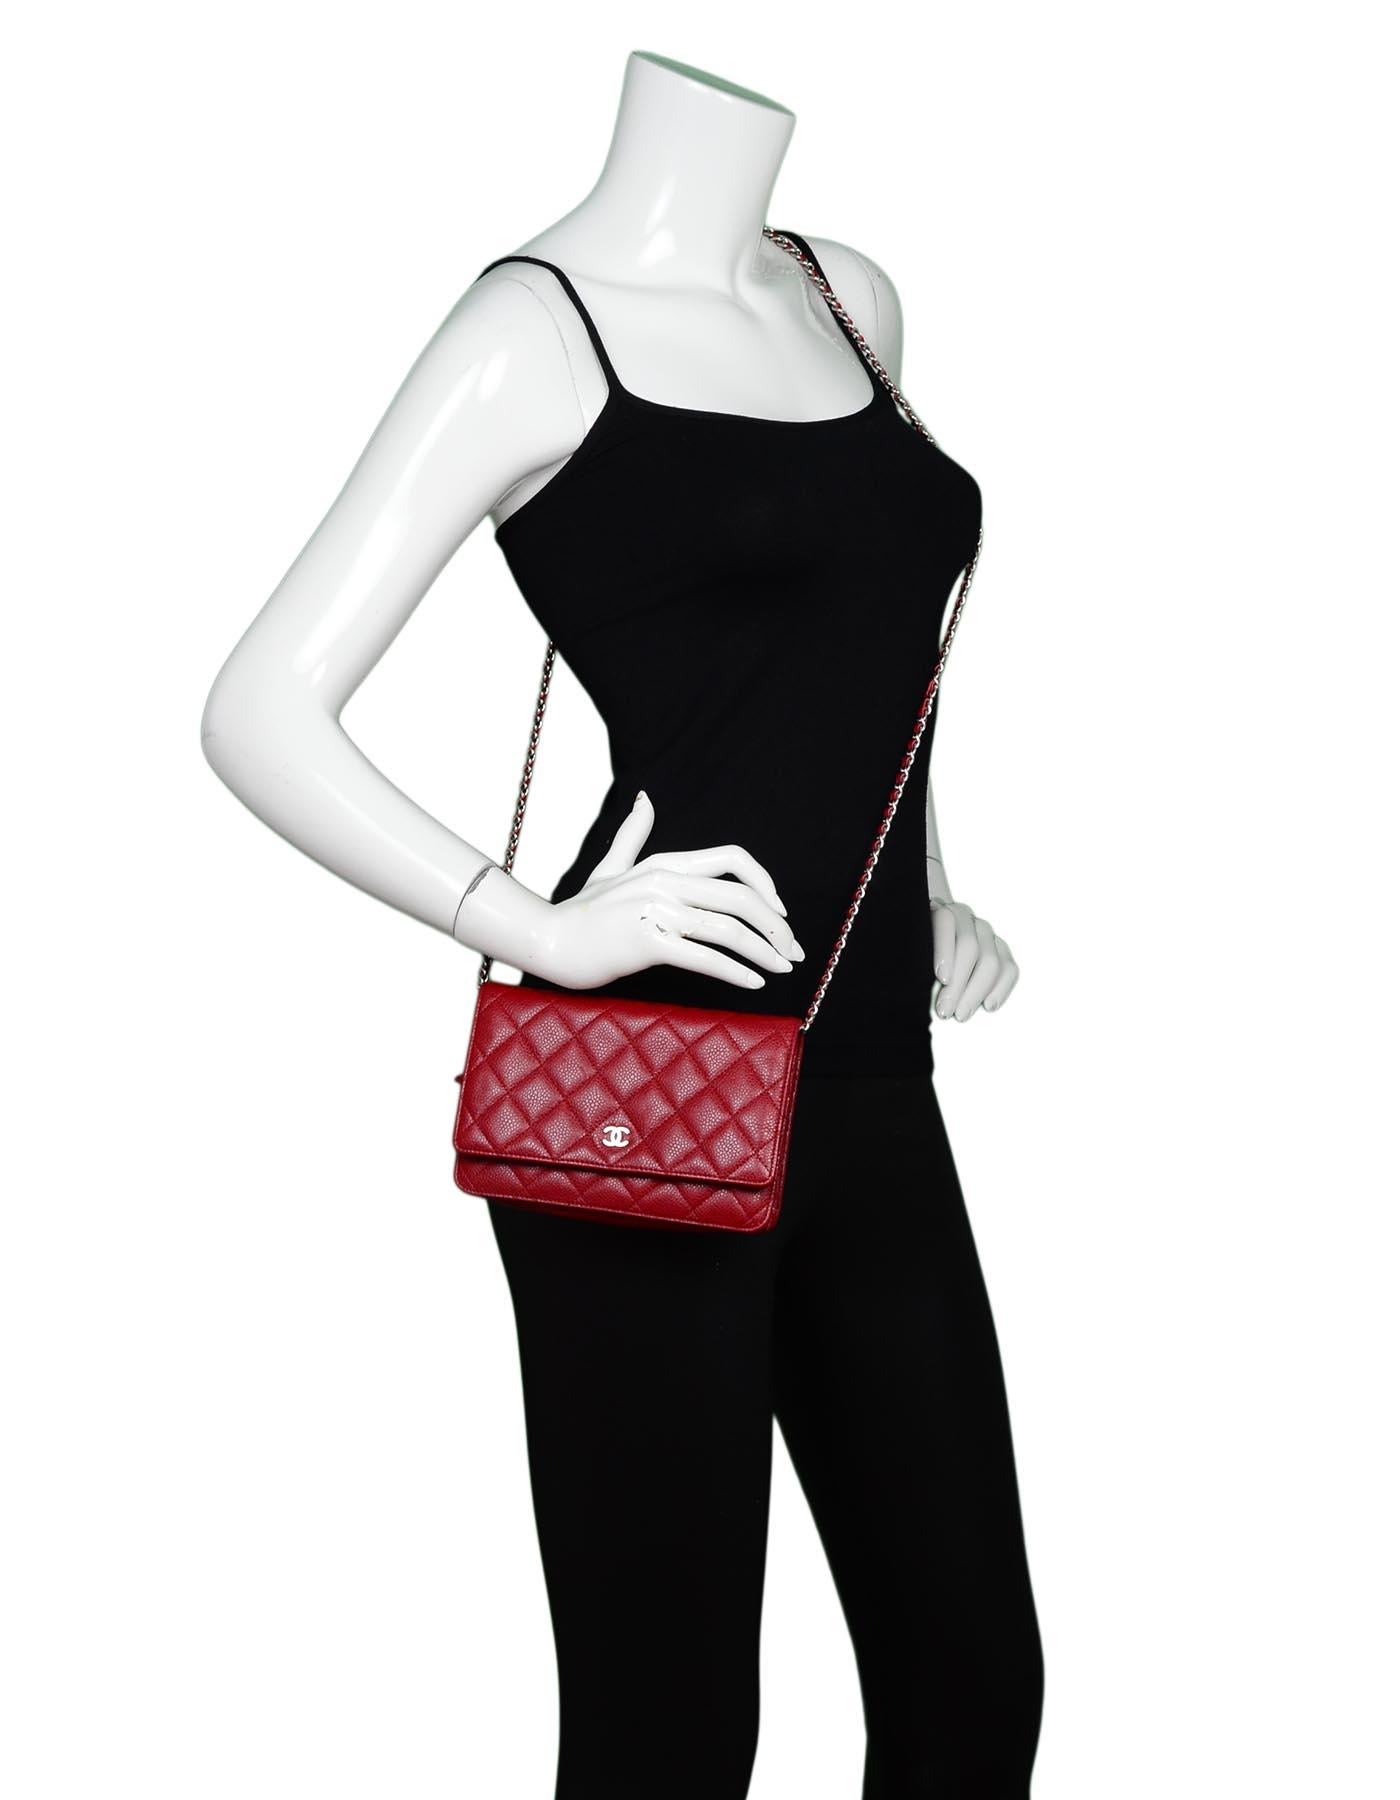 Chanel Red Caviar Leather WOC Wallet On Chain Crossbody Bag

Made In: France
Year Of Production: 2010 - 2011
Color: Red
Hardware: Silvertone
Materials: Caviar leather and metal
Lining: Red grosgrain
Closure/Opening: Flap top with snap